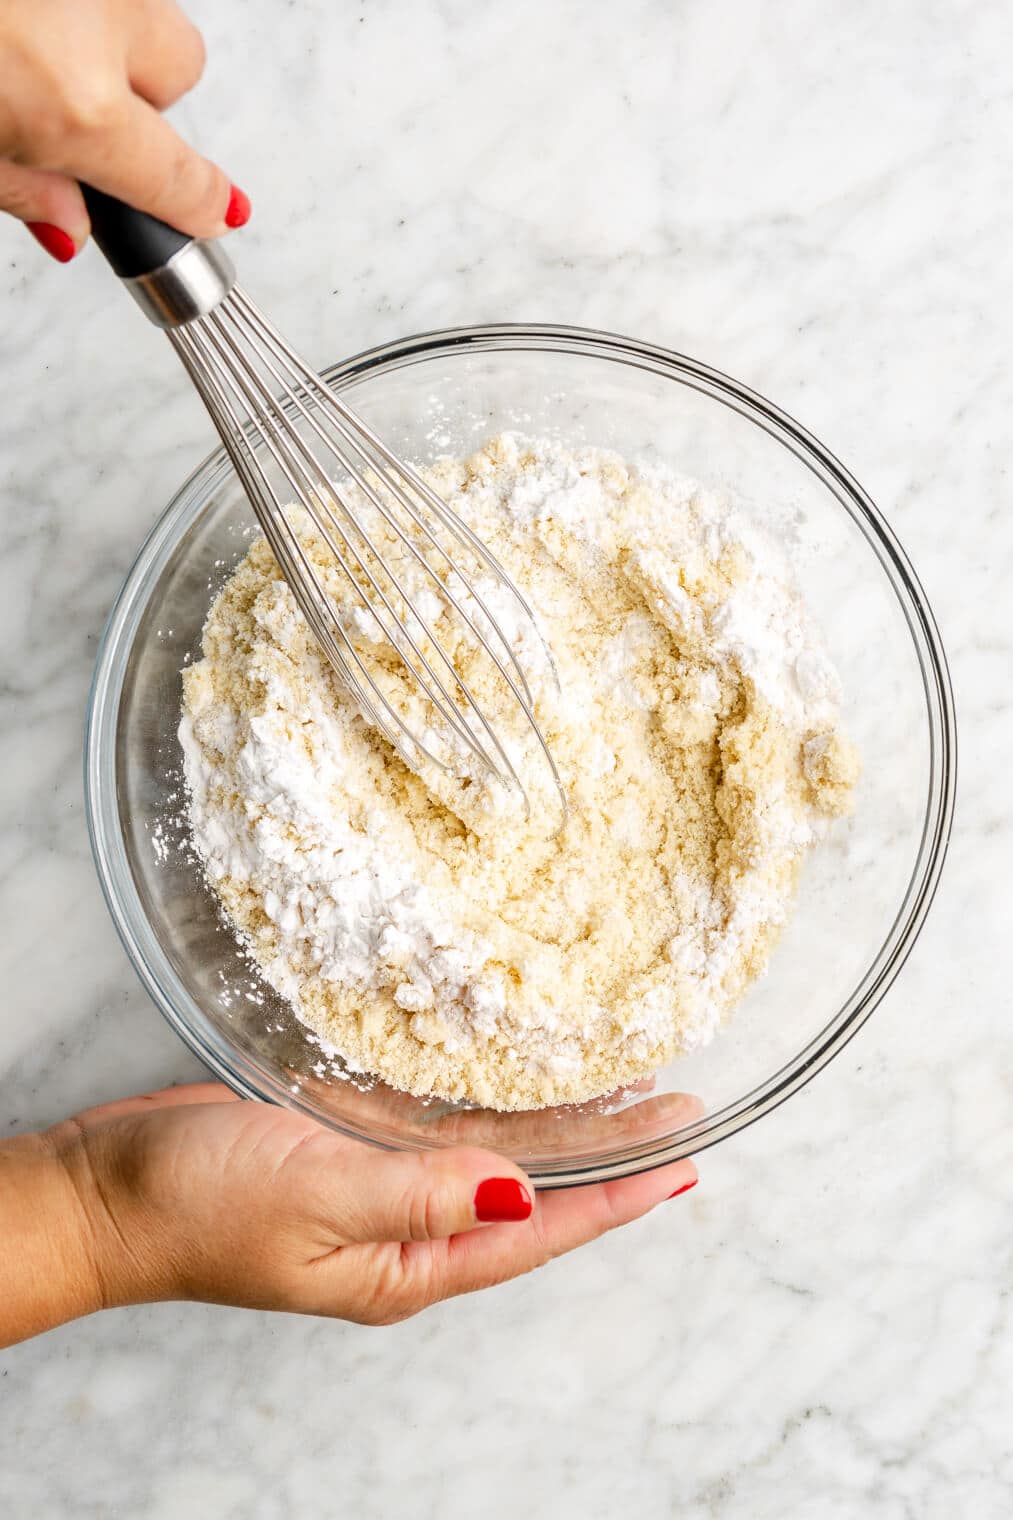 Dry ingredients being whisked together in a glass bowl.